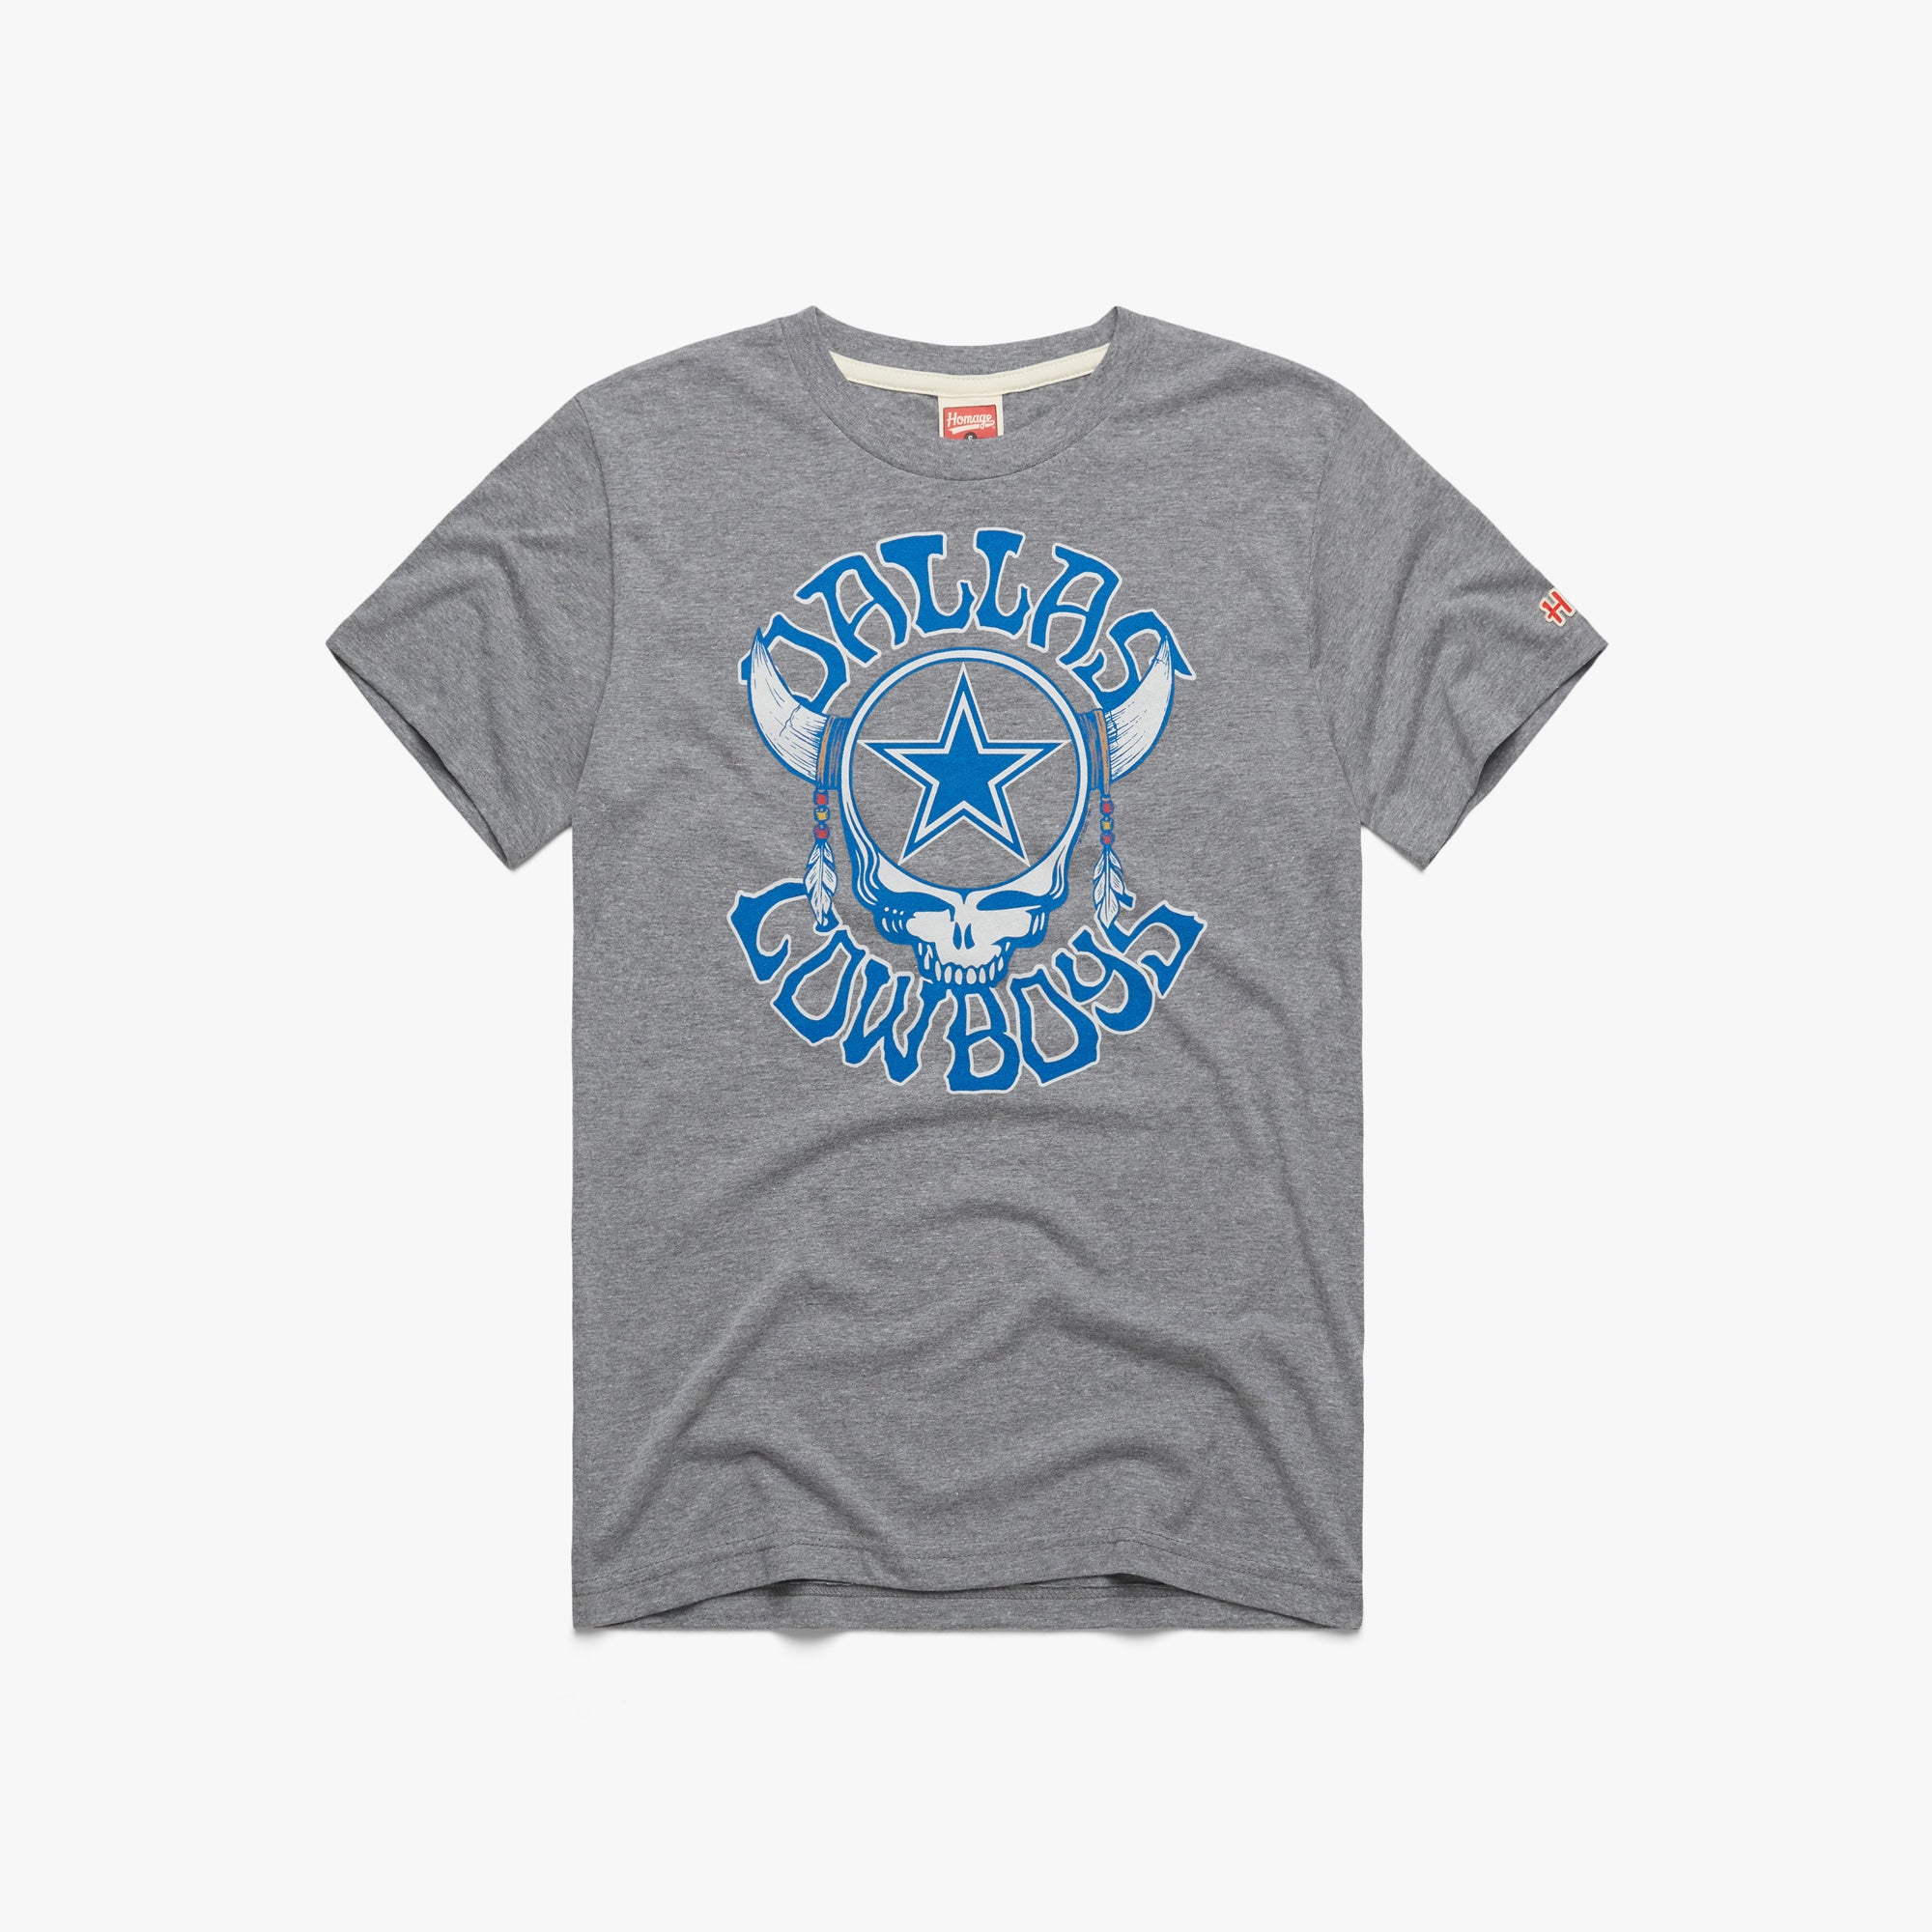 NFL x Grateful Dead x Dallas Cowboys T-Shirt from Homage. | Officially Licensed Vintage NFL Apparel from Homage Pro Shop.